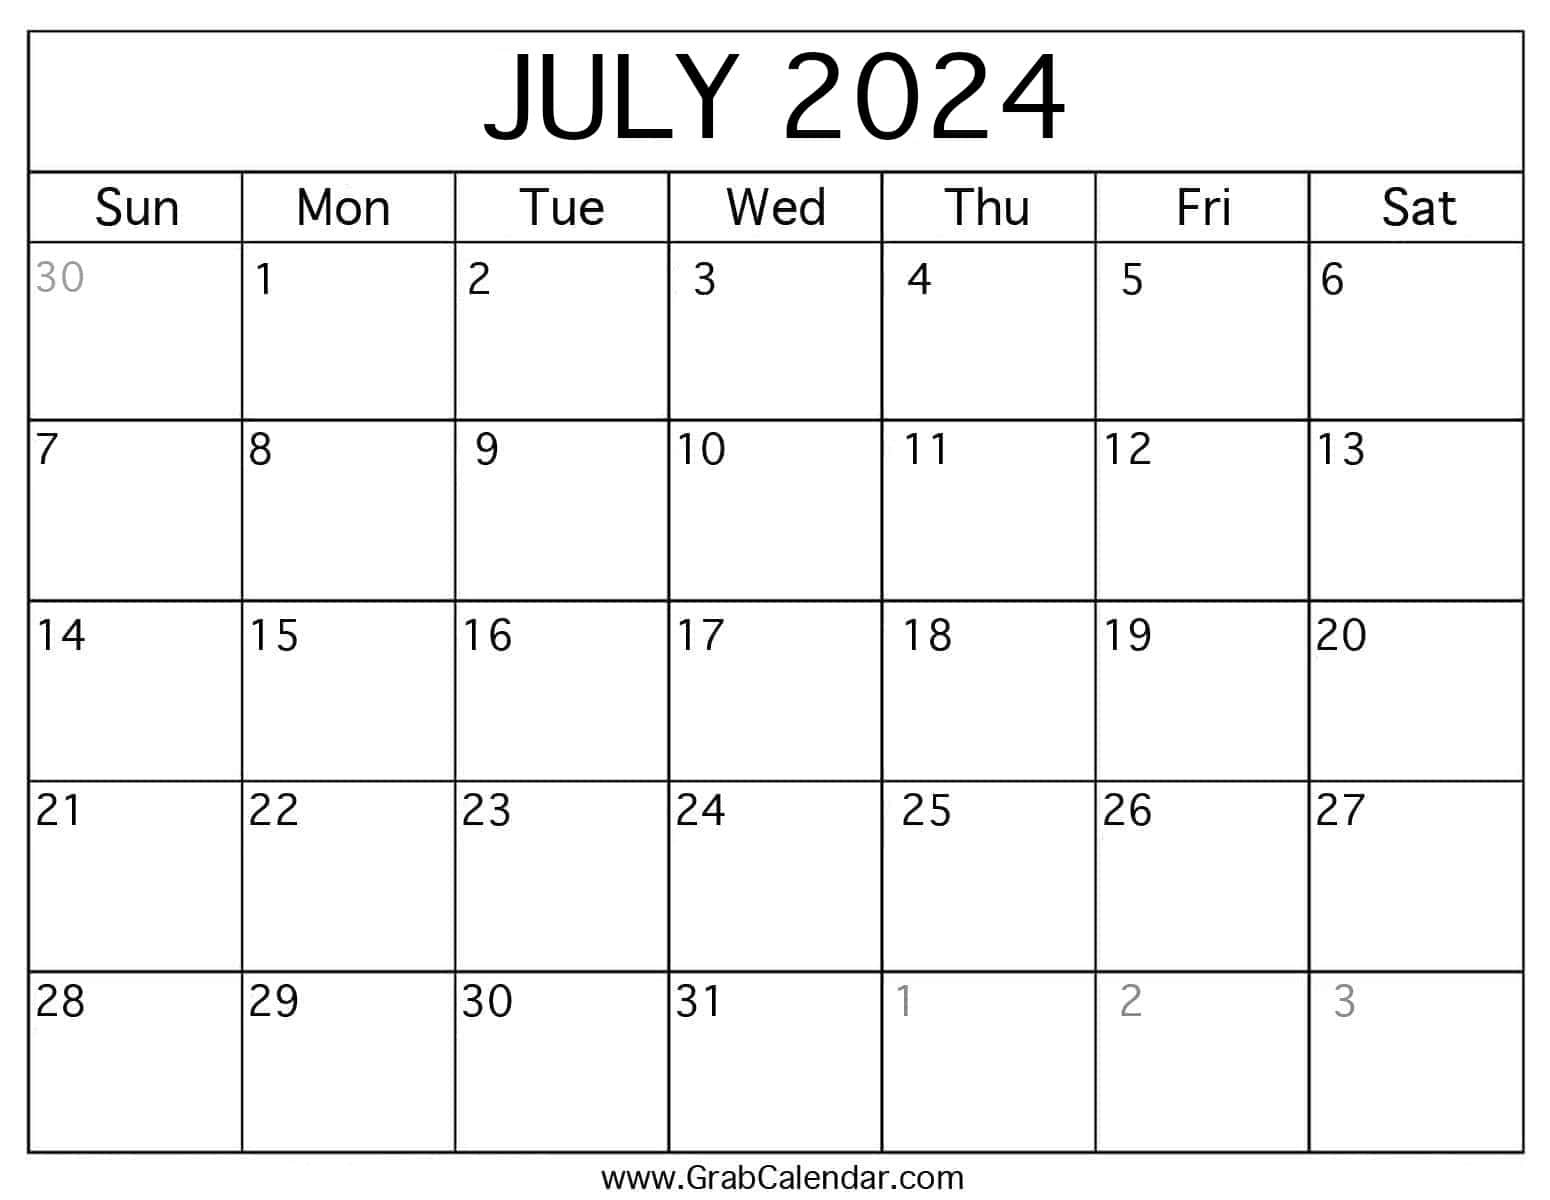 Printable July 2024 Calendar pertaining to Picture of a Calendar For July 2024